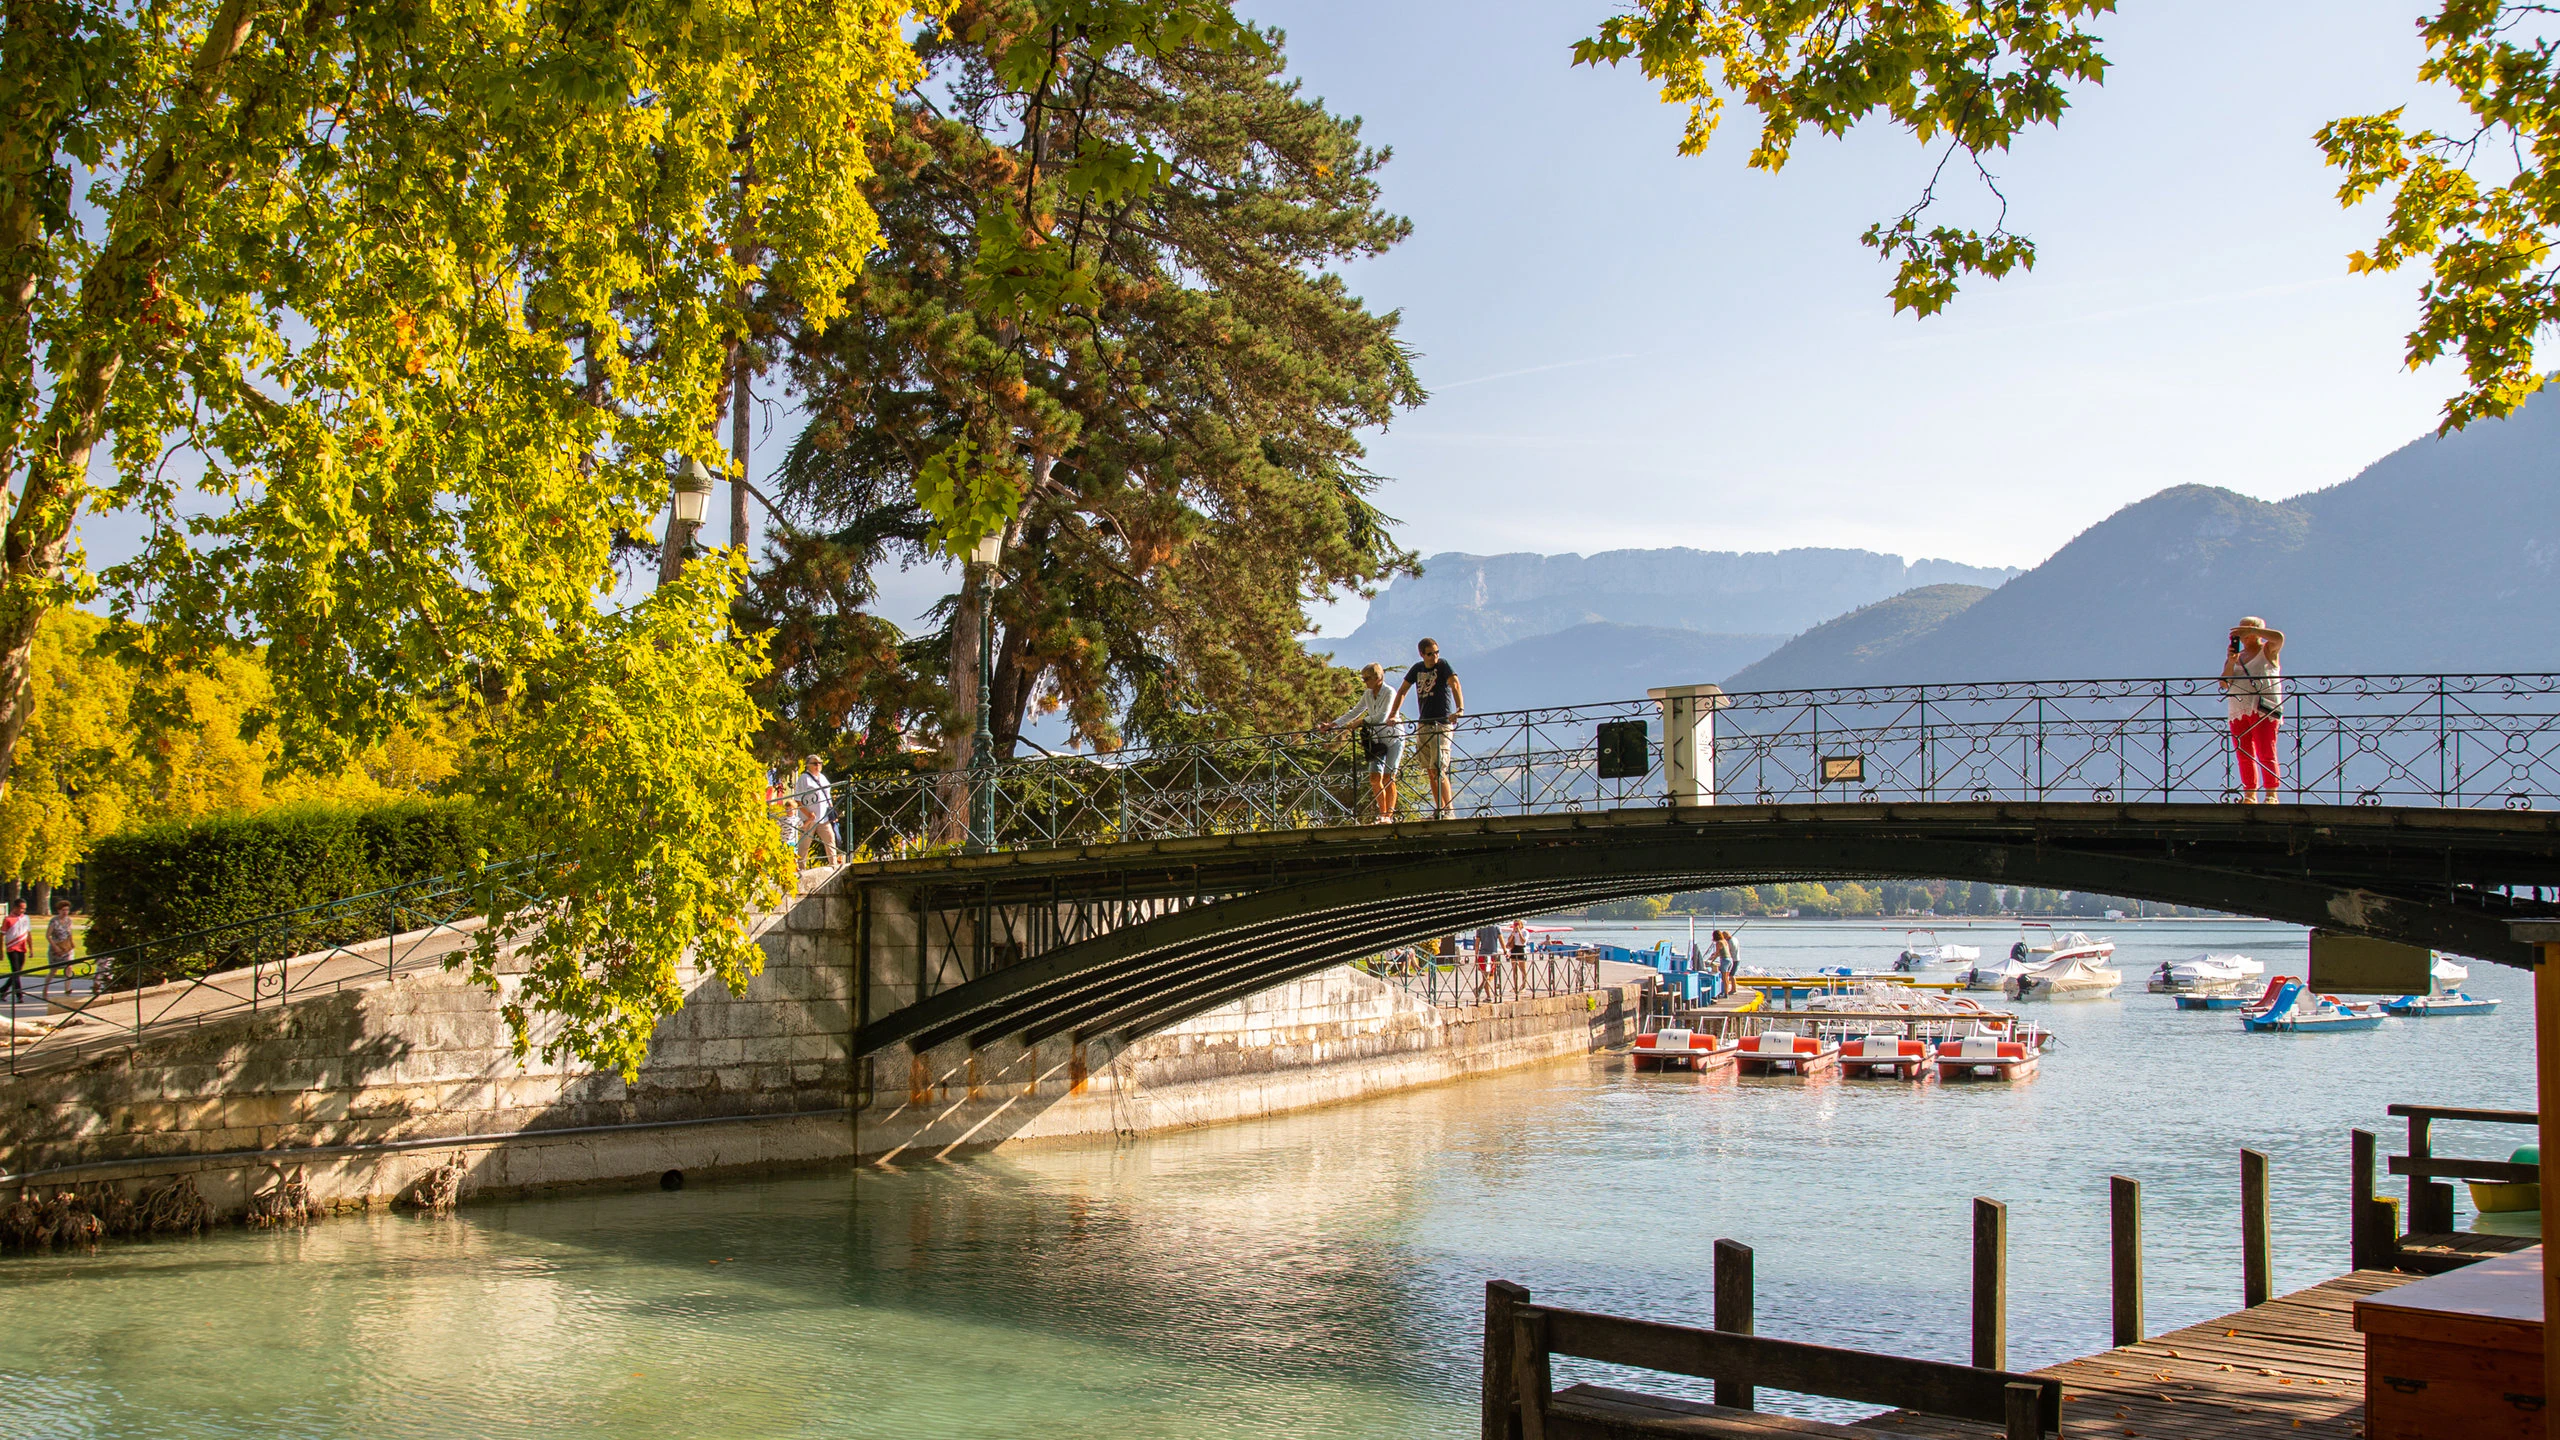 Bridge of Love in France, Europe | Architecture - Rated 3.9